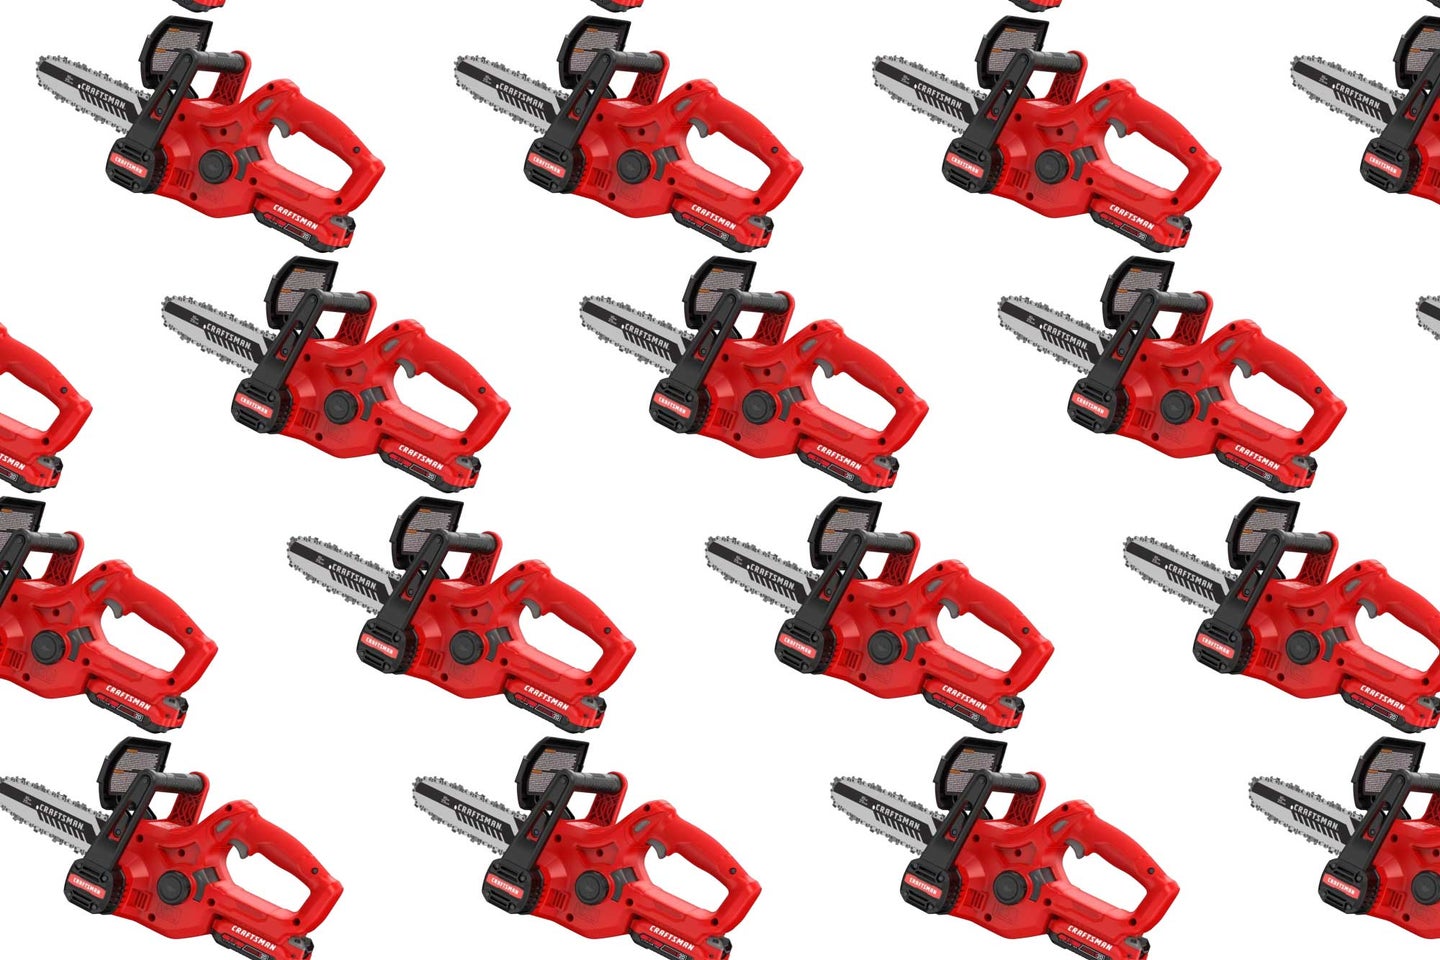 Red mini Craftsman chainsaws in a pattern on a plain background